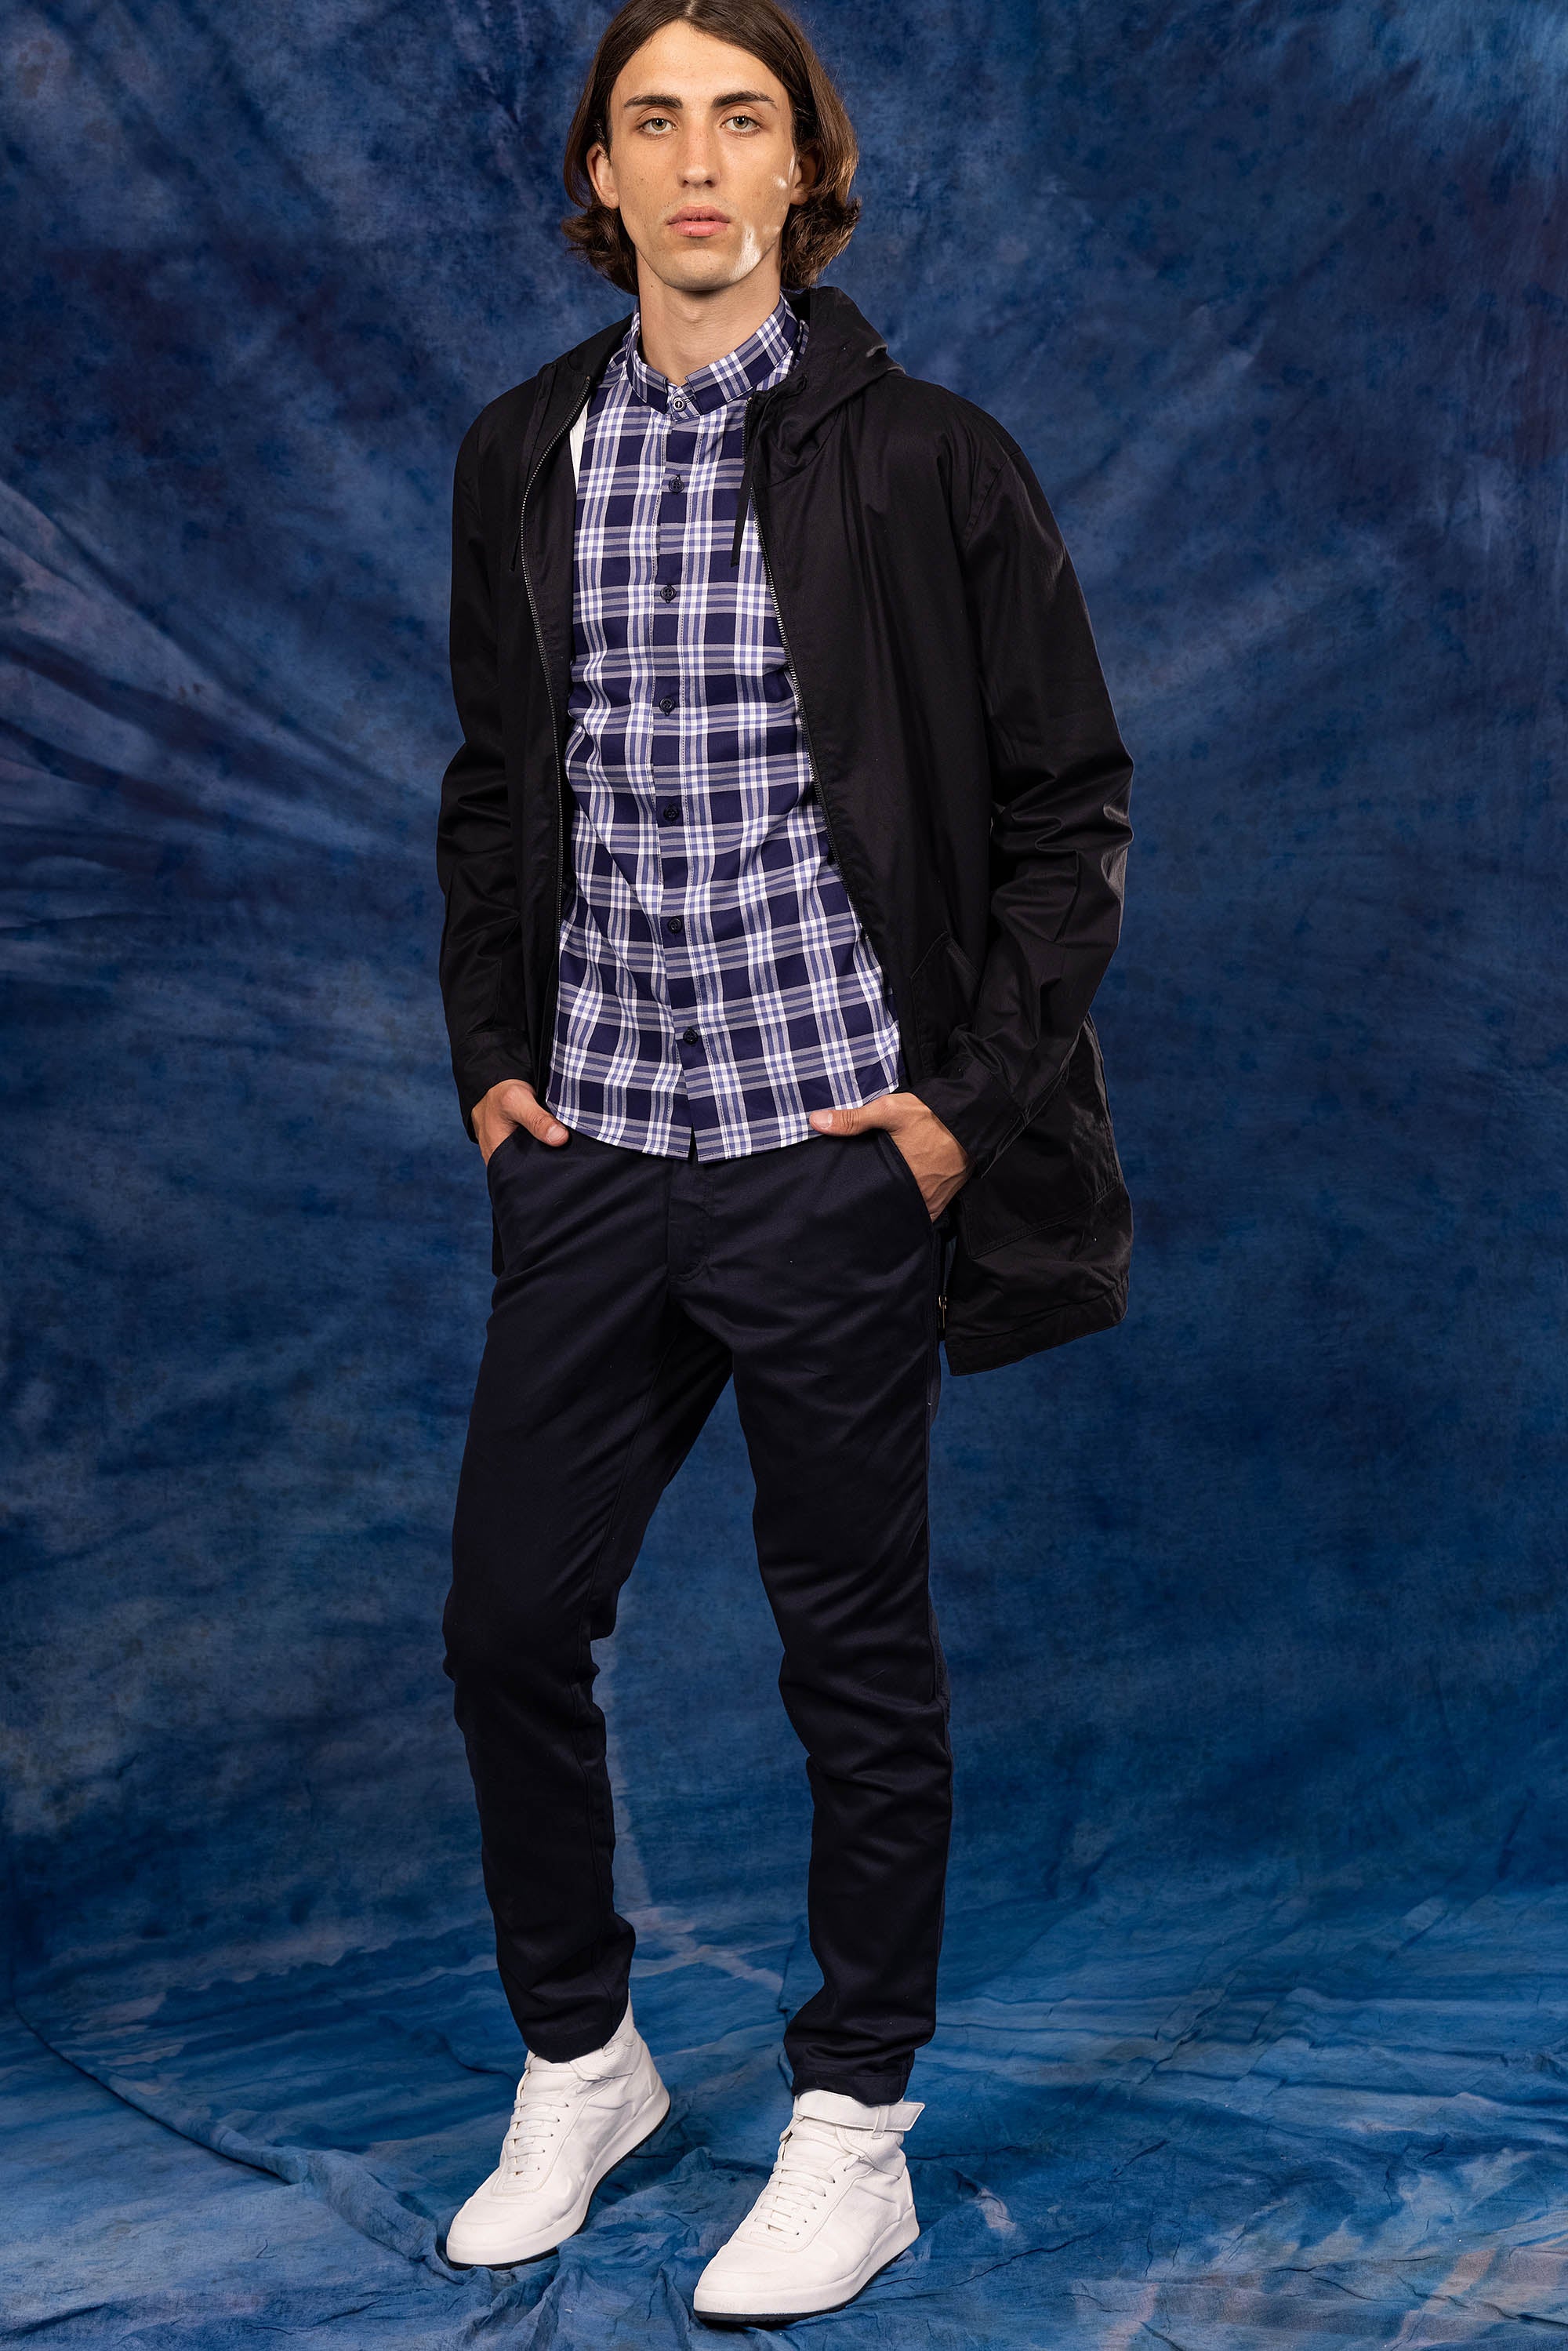 black coat over a navy blue plaid shirt for the new summer 2023 misericordia collection